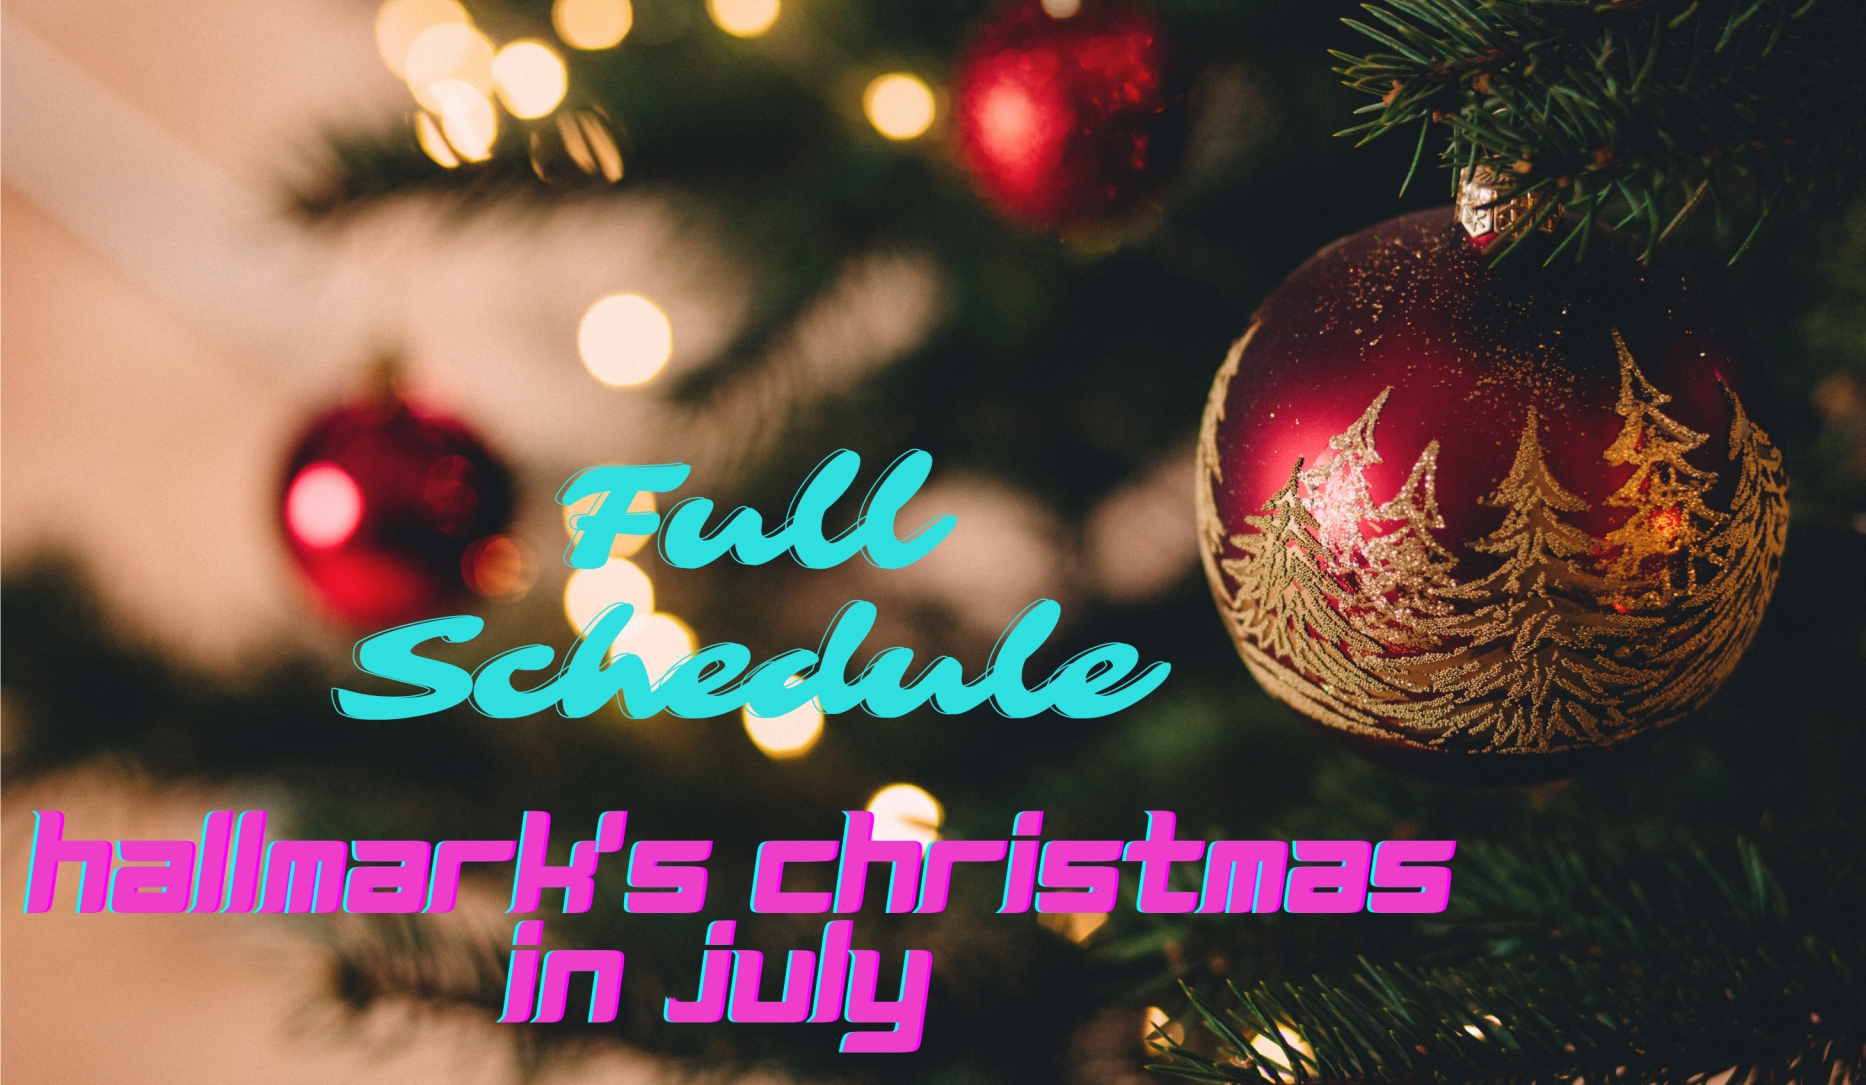 The Full Schedule of Hallmark’s Christmas in July 2021